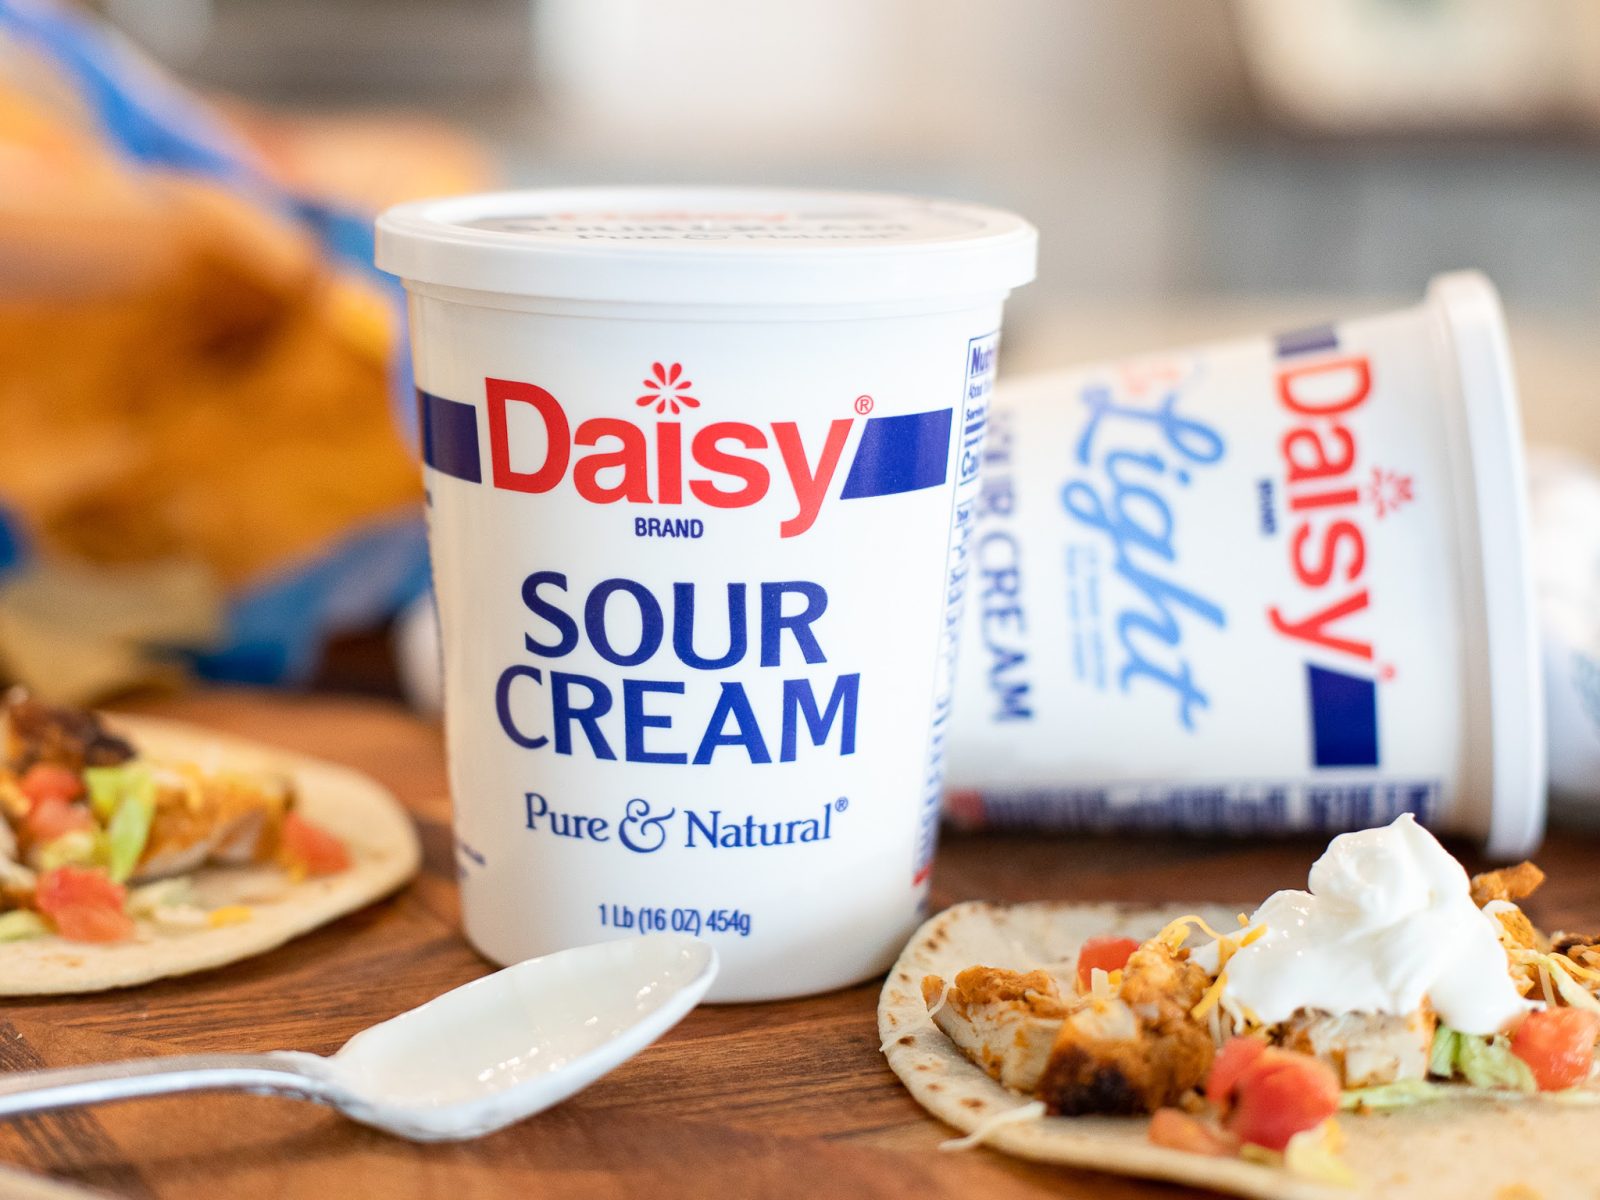 Get Daisy Cottage Cheese or Sour Cream For As Low As $2.19 At Kroger